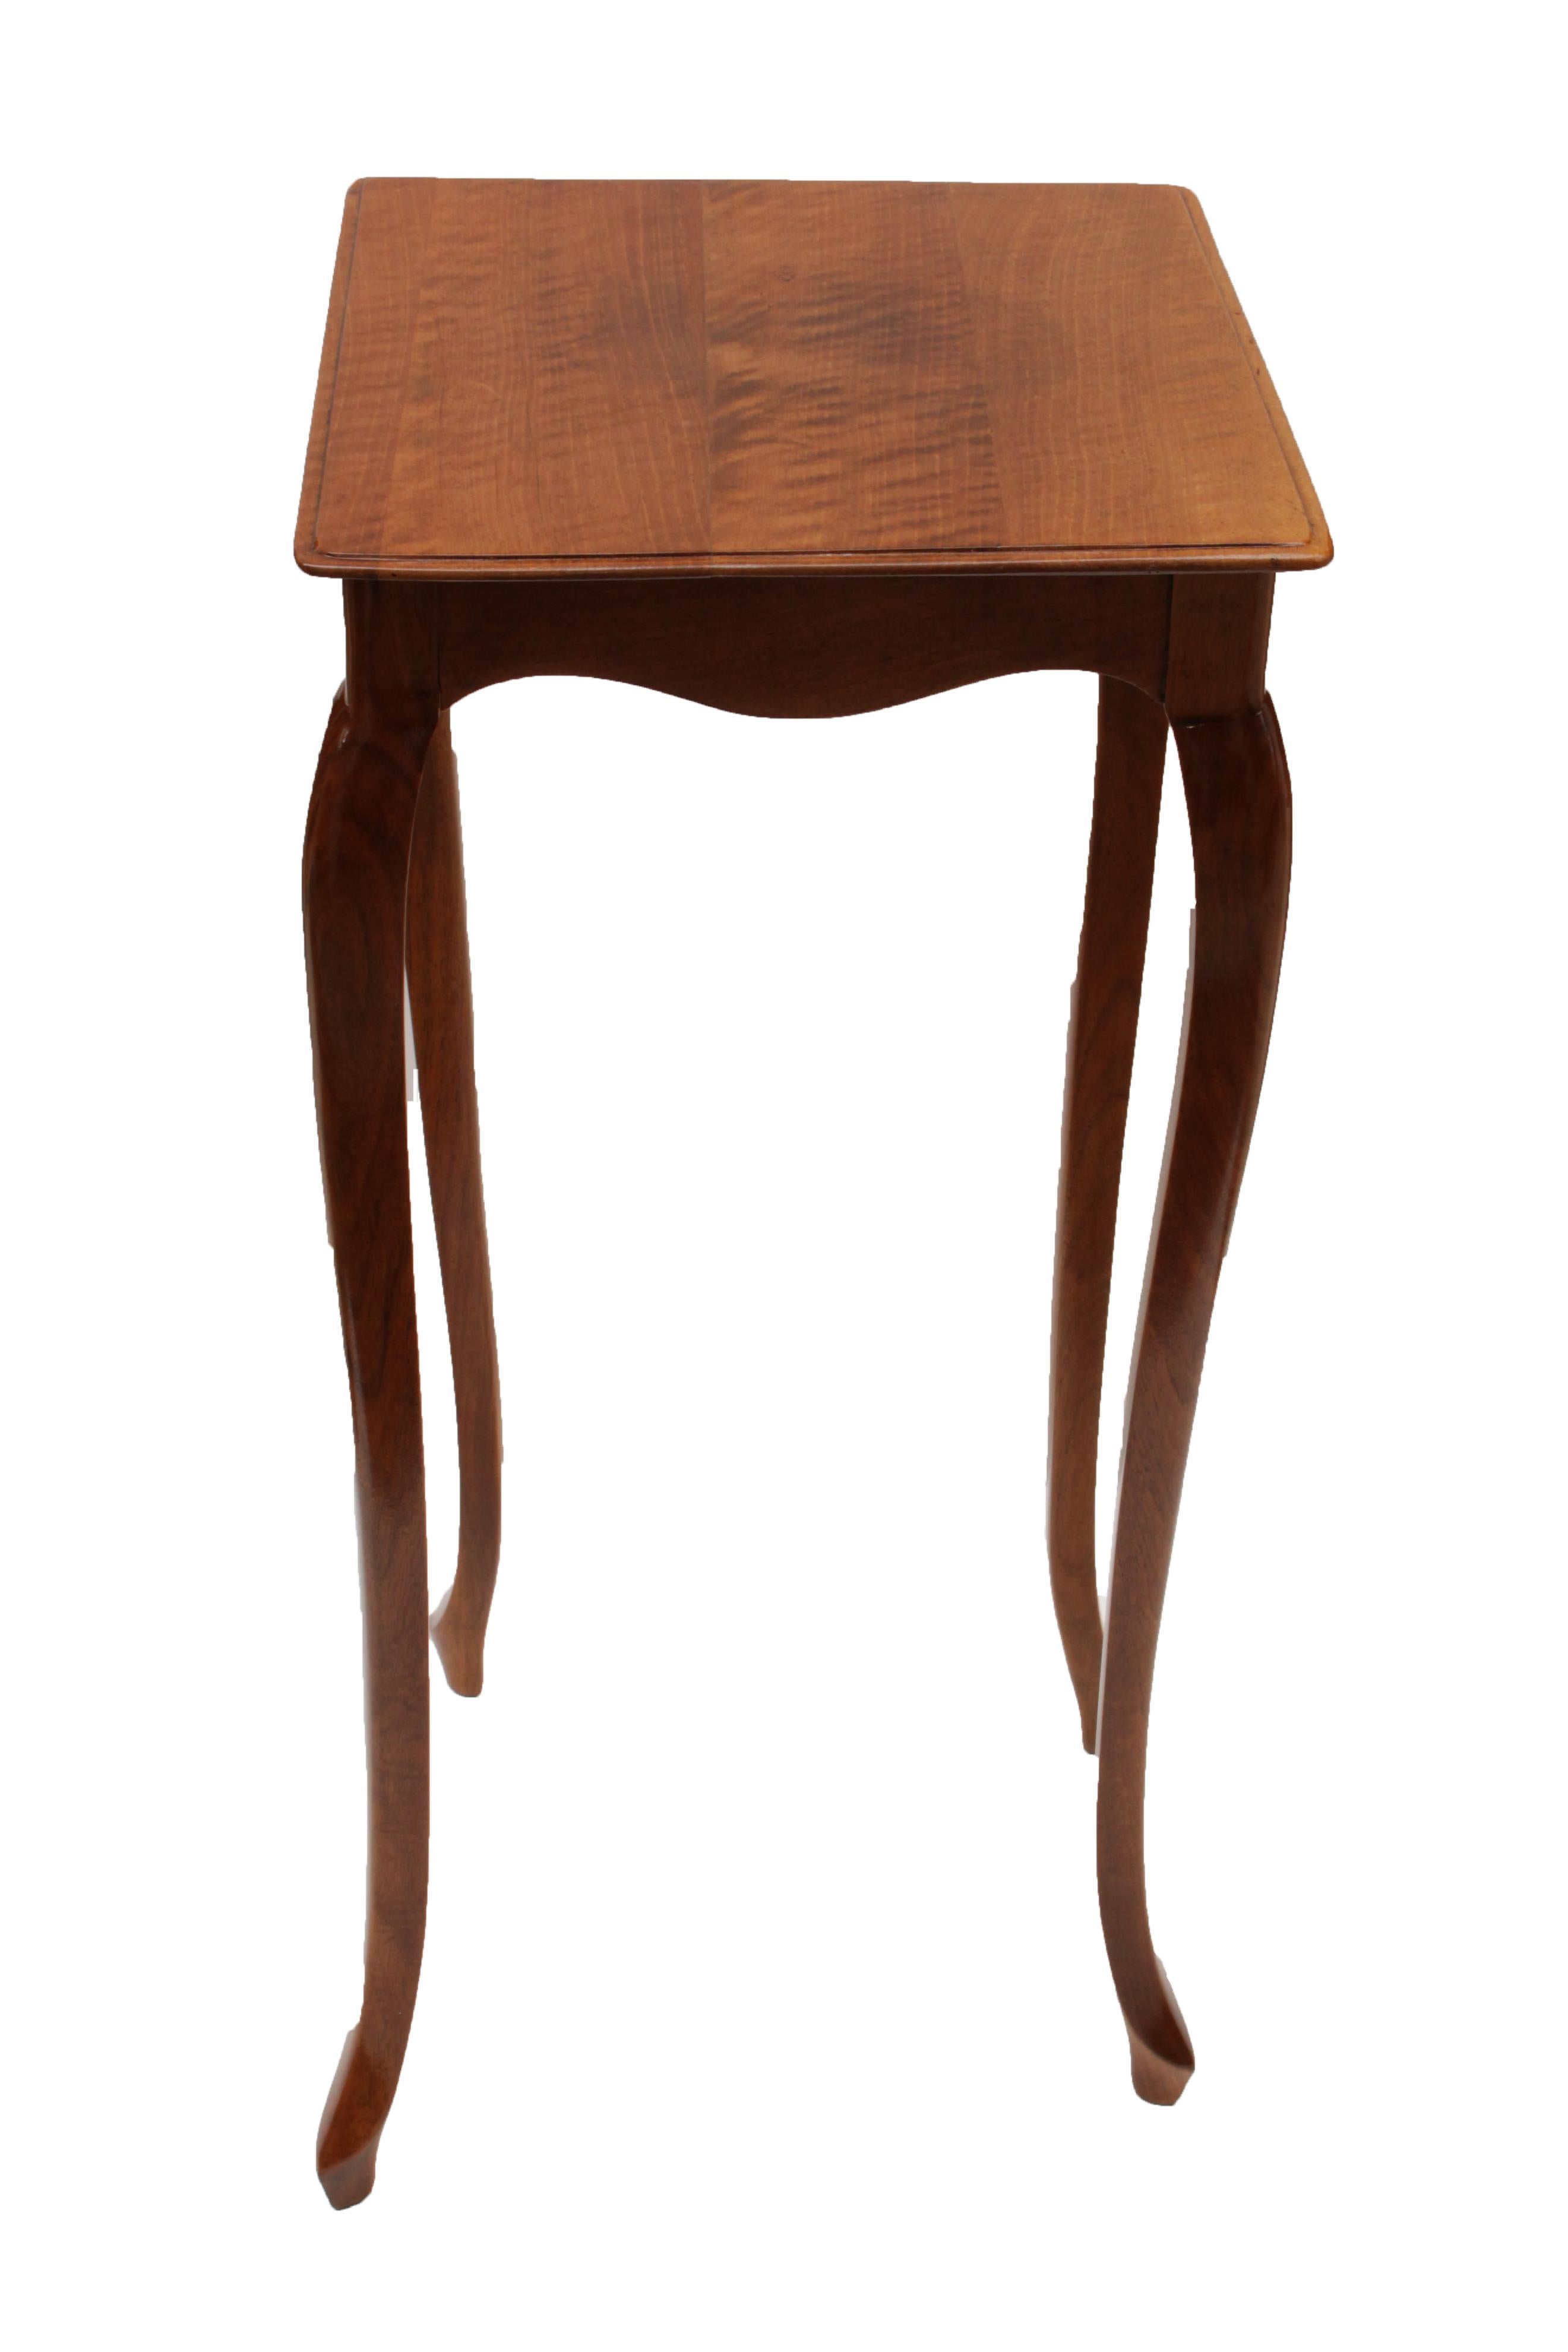 Small filigree side table made of solid walnut. In very good restored condition.